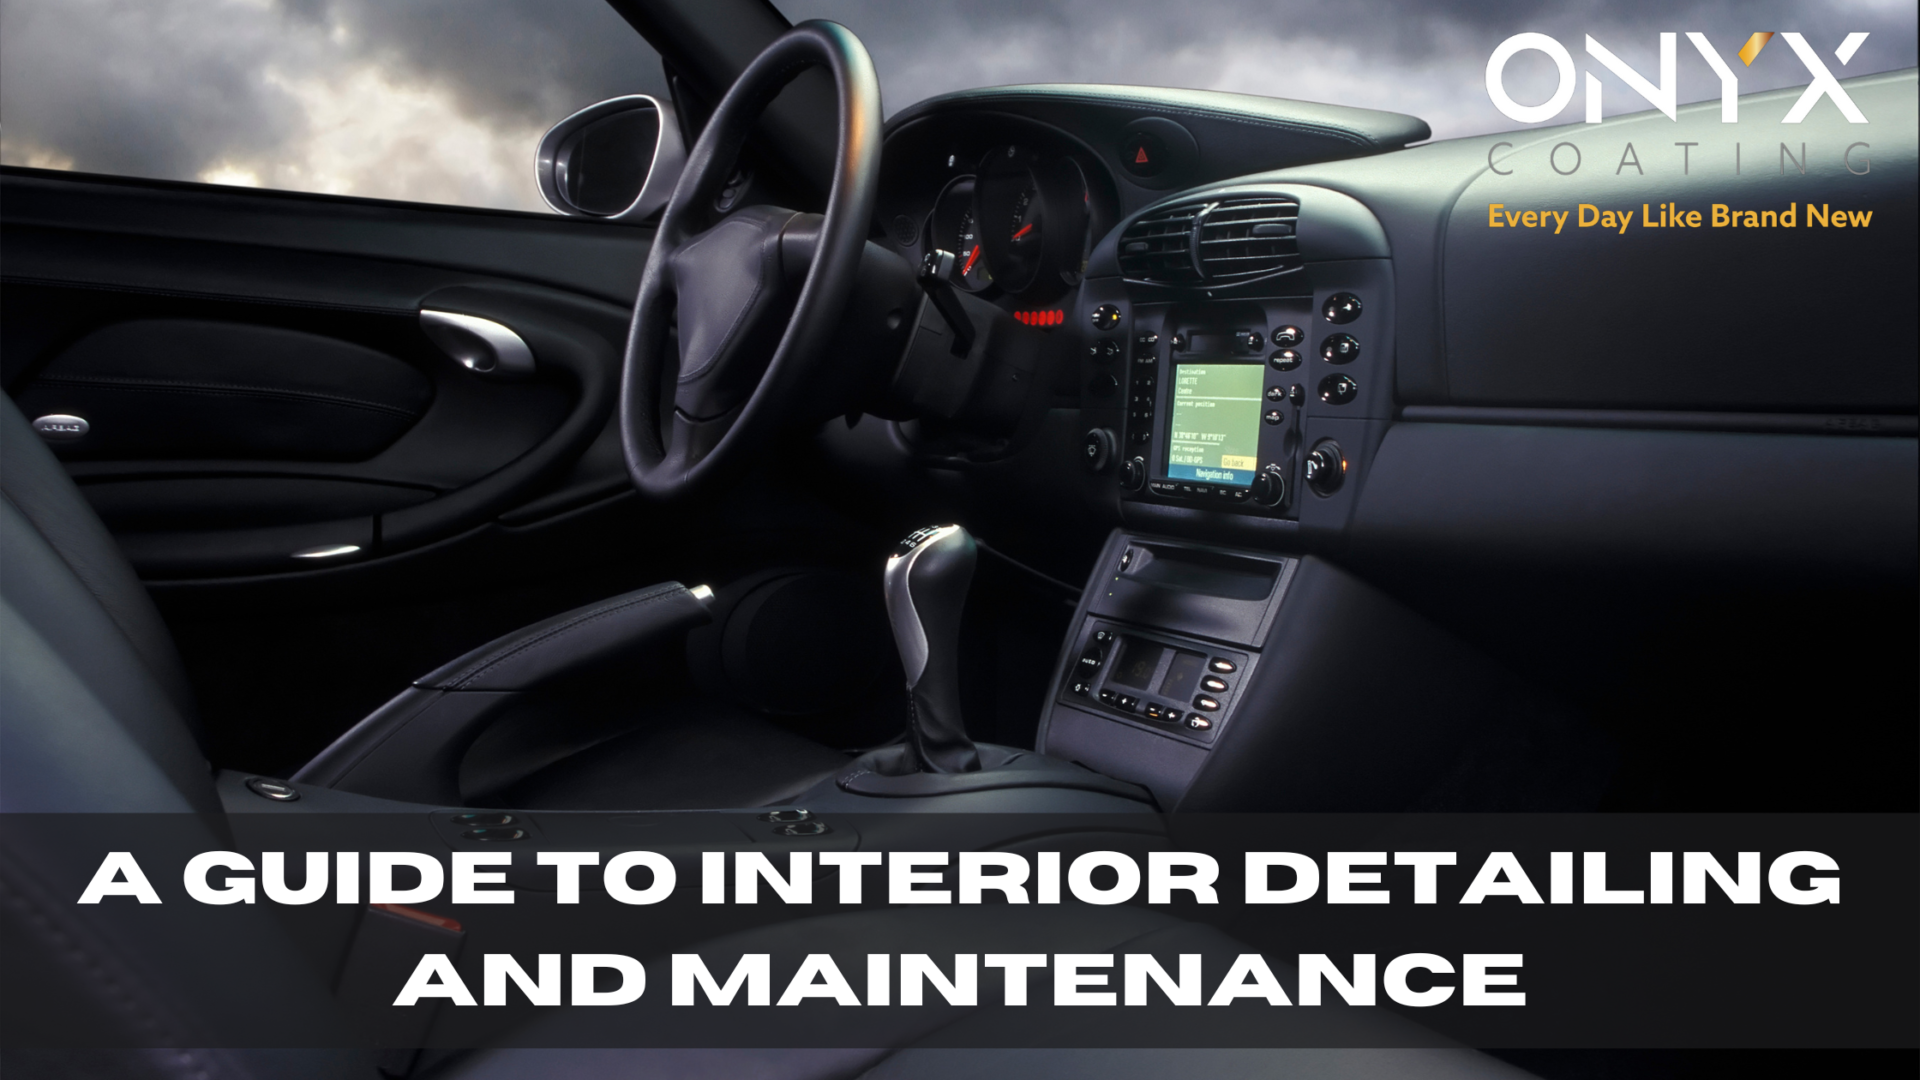 A guide to interior detailing and maintenance